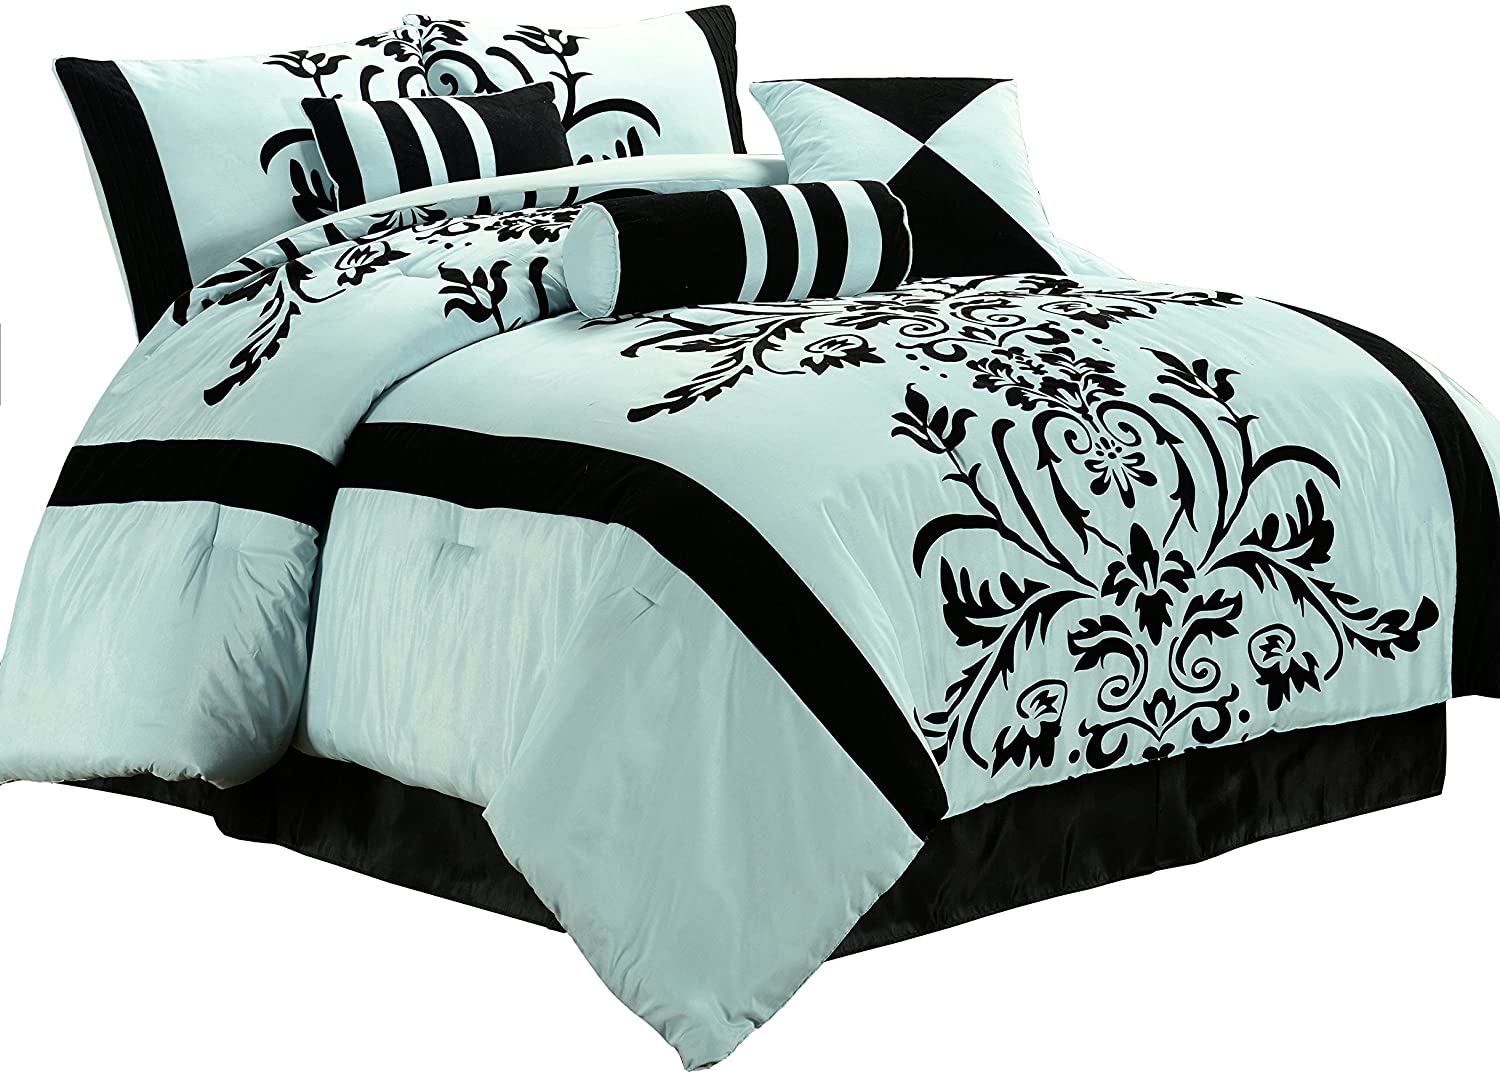 King Size Chezmoi Collection Nova 6-Piece Retro Floral Flowers Bedding Comforter Set with Fitted Sheet